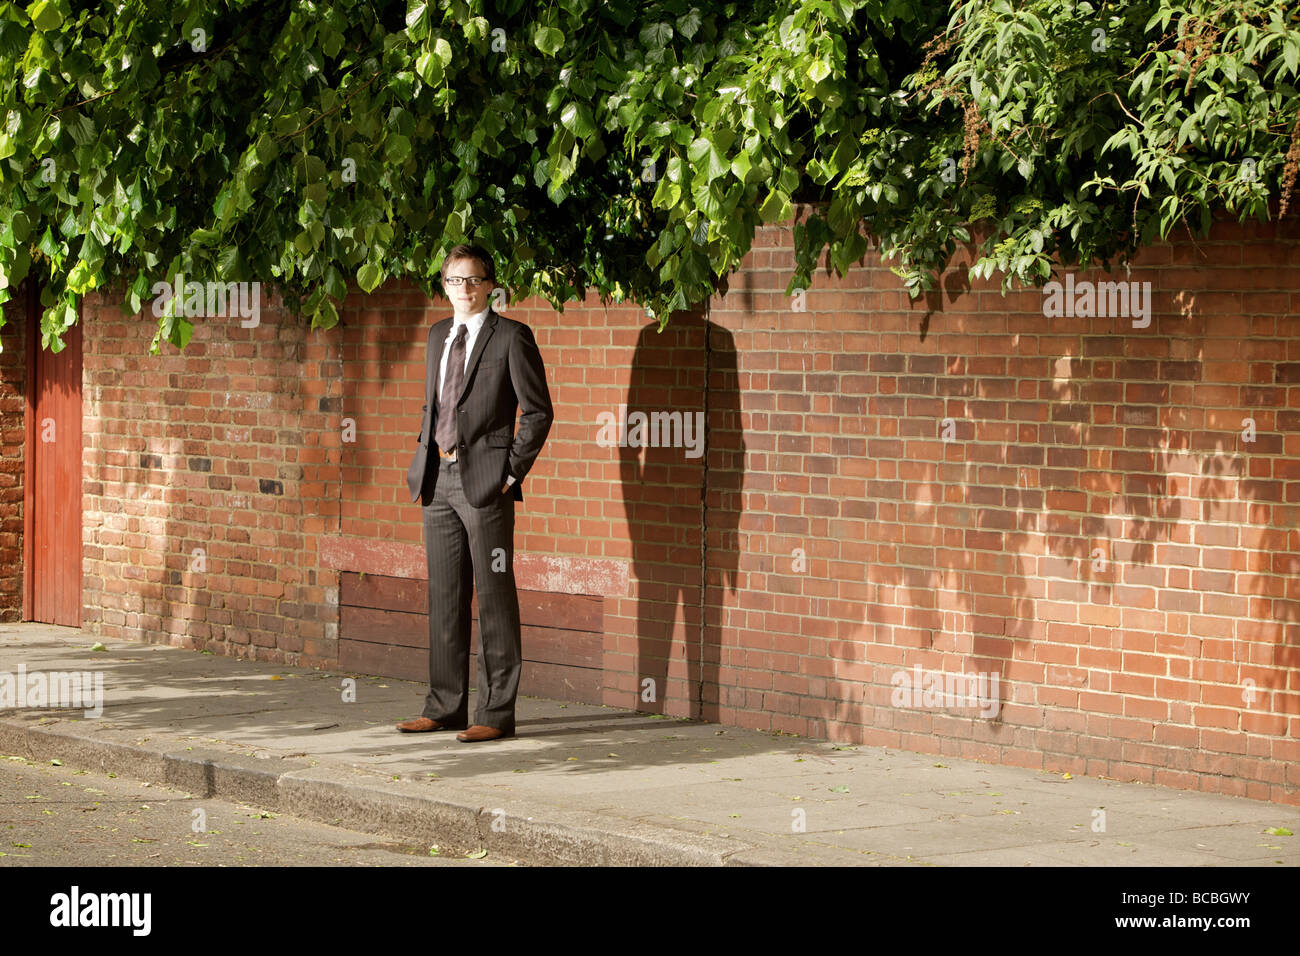 A suited young professional man stands waiting on an urban street  in the shade, Marylebone, London, England. Stock Photo